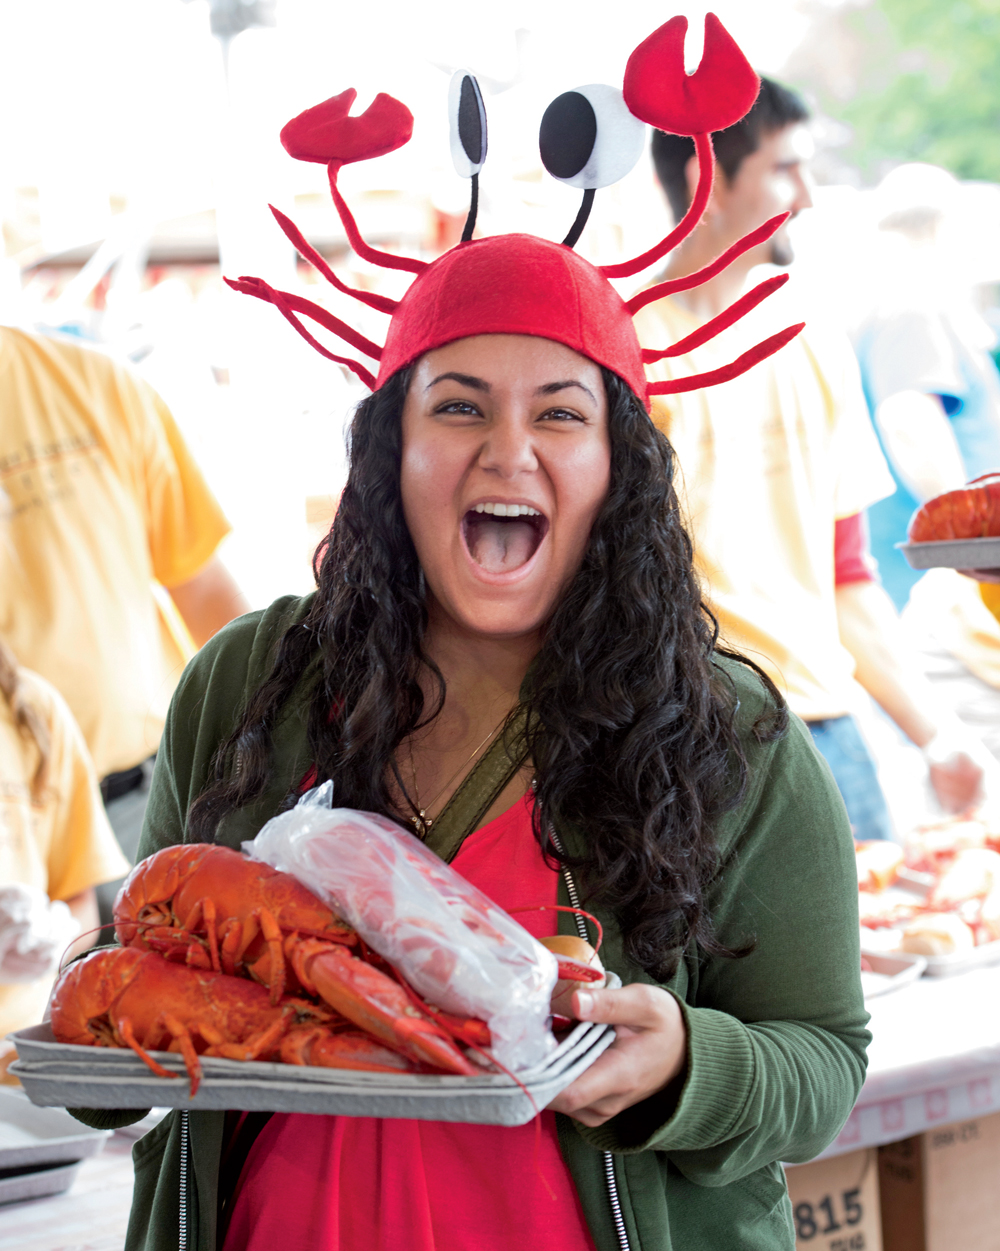 The Maine Lobster Festival draws 30,000 people to Rockland each summer to indulge in more than 20,000 pounds of lobster (straight up or in a roll, wrap, or salad) and 1,700 pounds of butter.